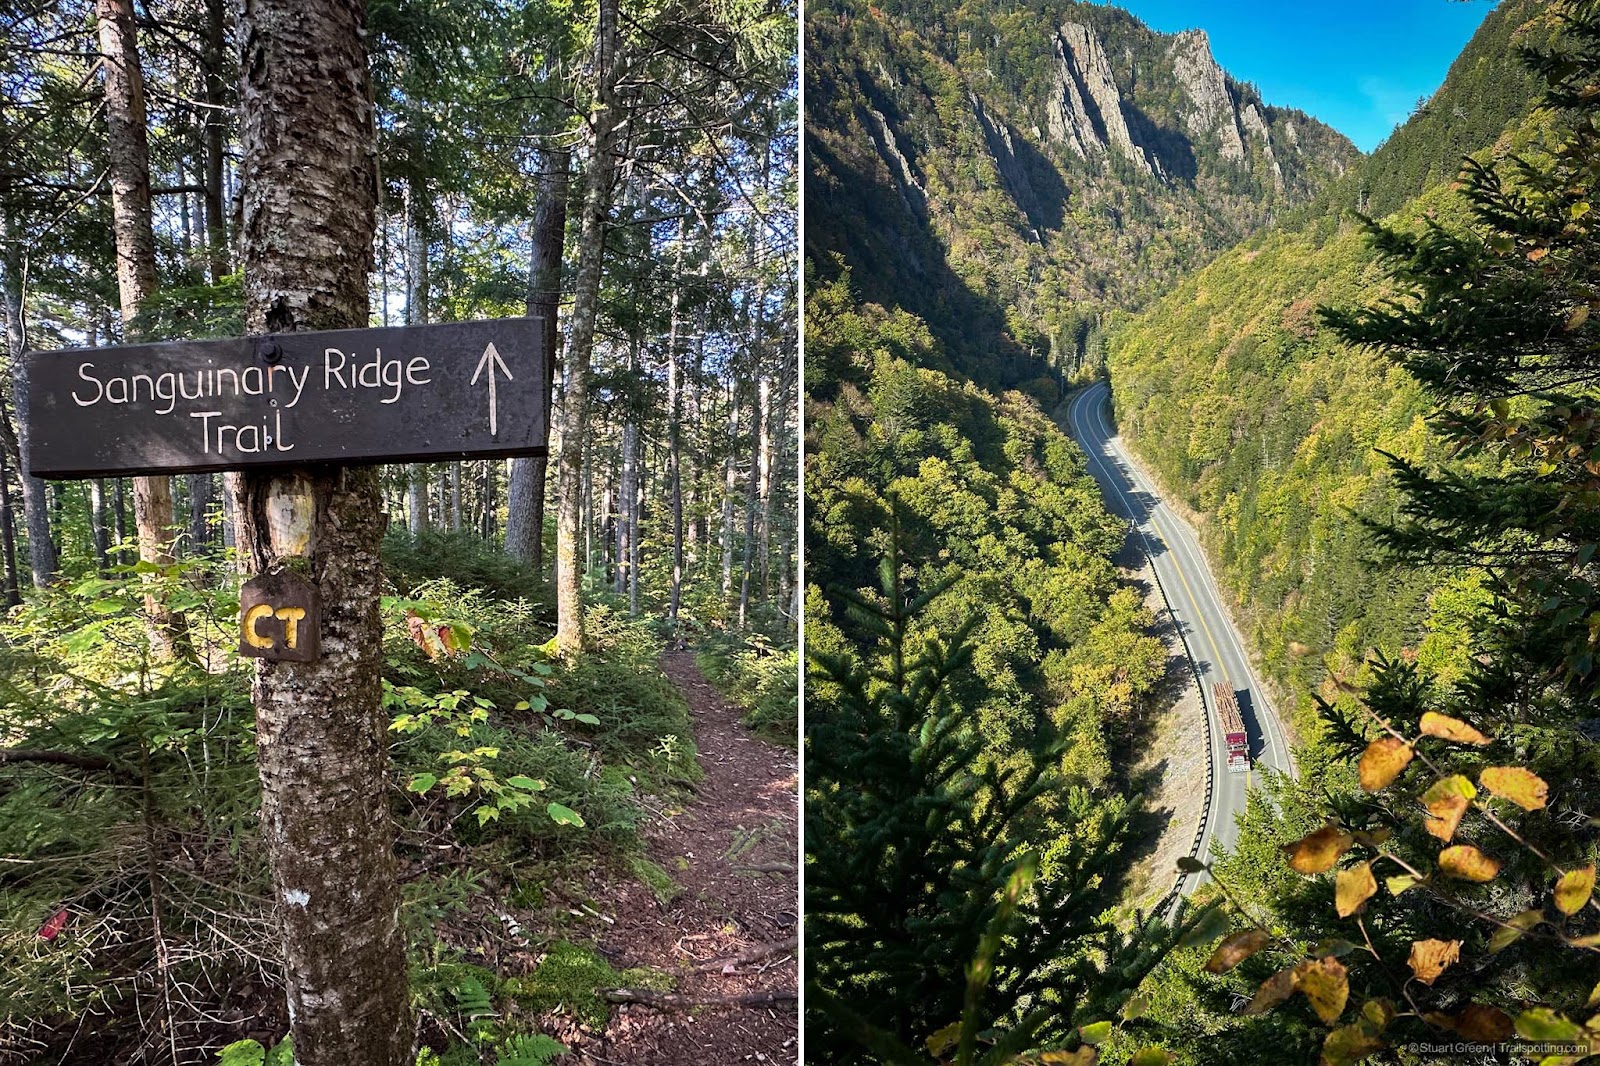 Left: Sangunary Ridge Trail sign in the woods. Right: Logging truck descending down a curving road at Dixville Notch